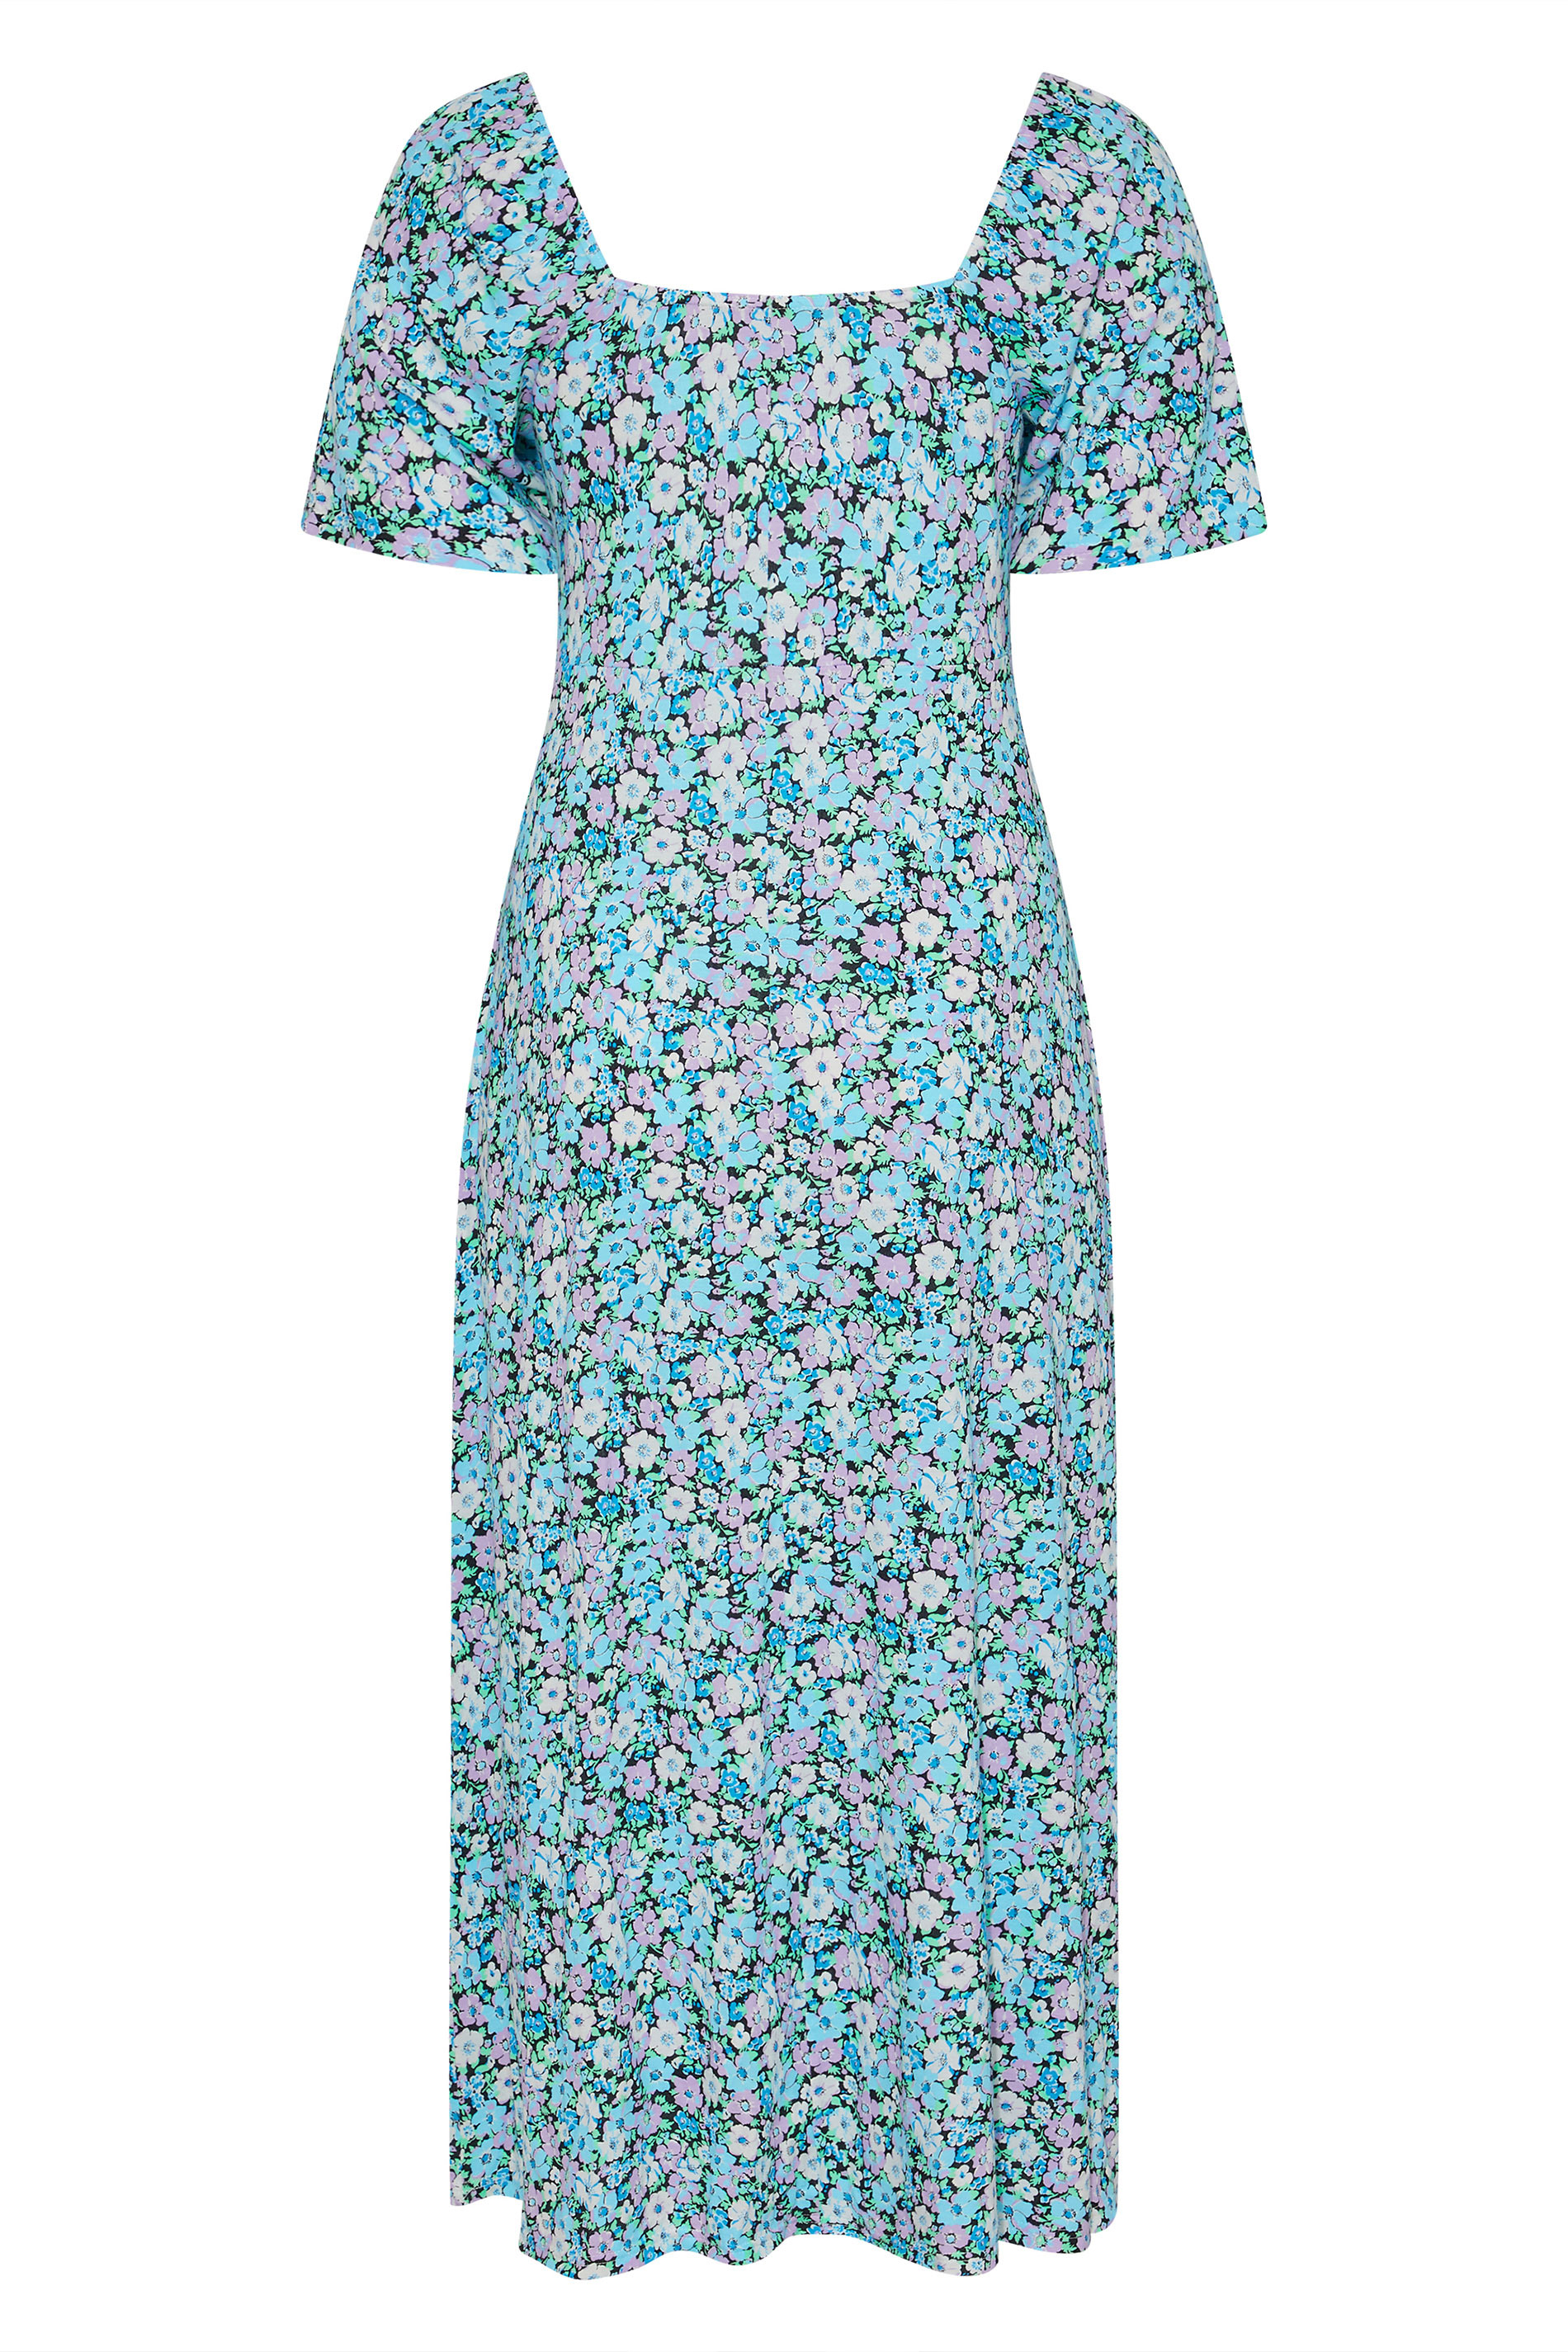 Robes Grande Taille Grande taille  Robes Midaxi | LIMITED COLLECTION - Robe Bleue Floral Manches Courtes - CK51720